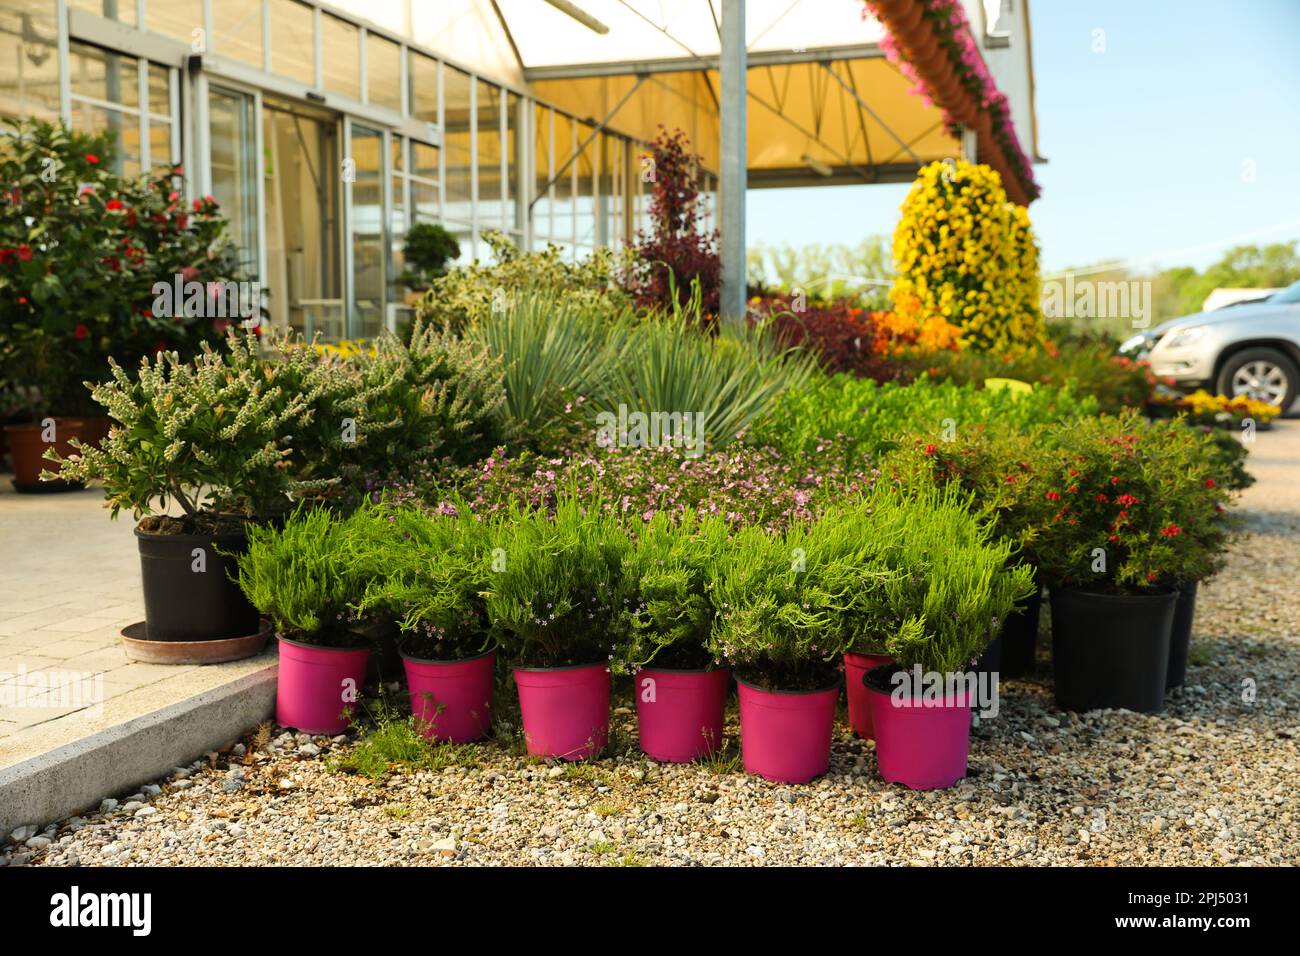 Many different potted plants near garden center Stock Photo